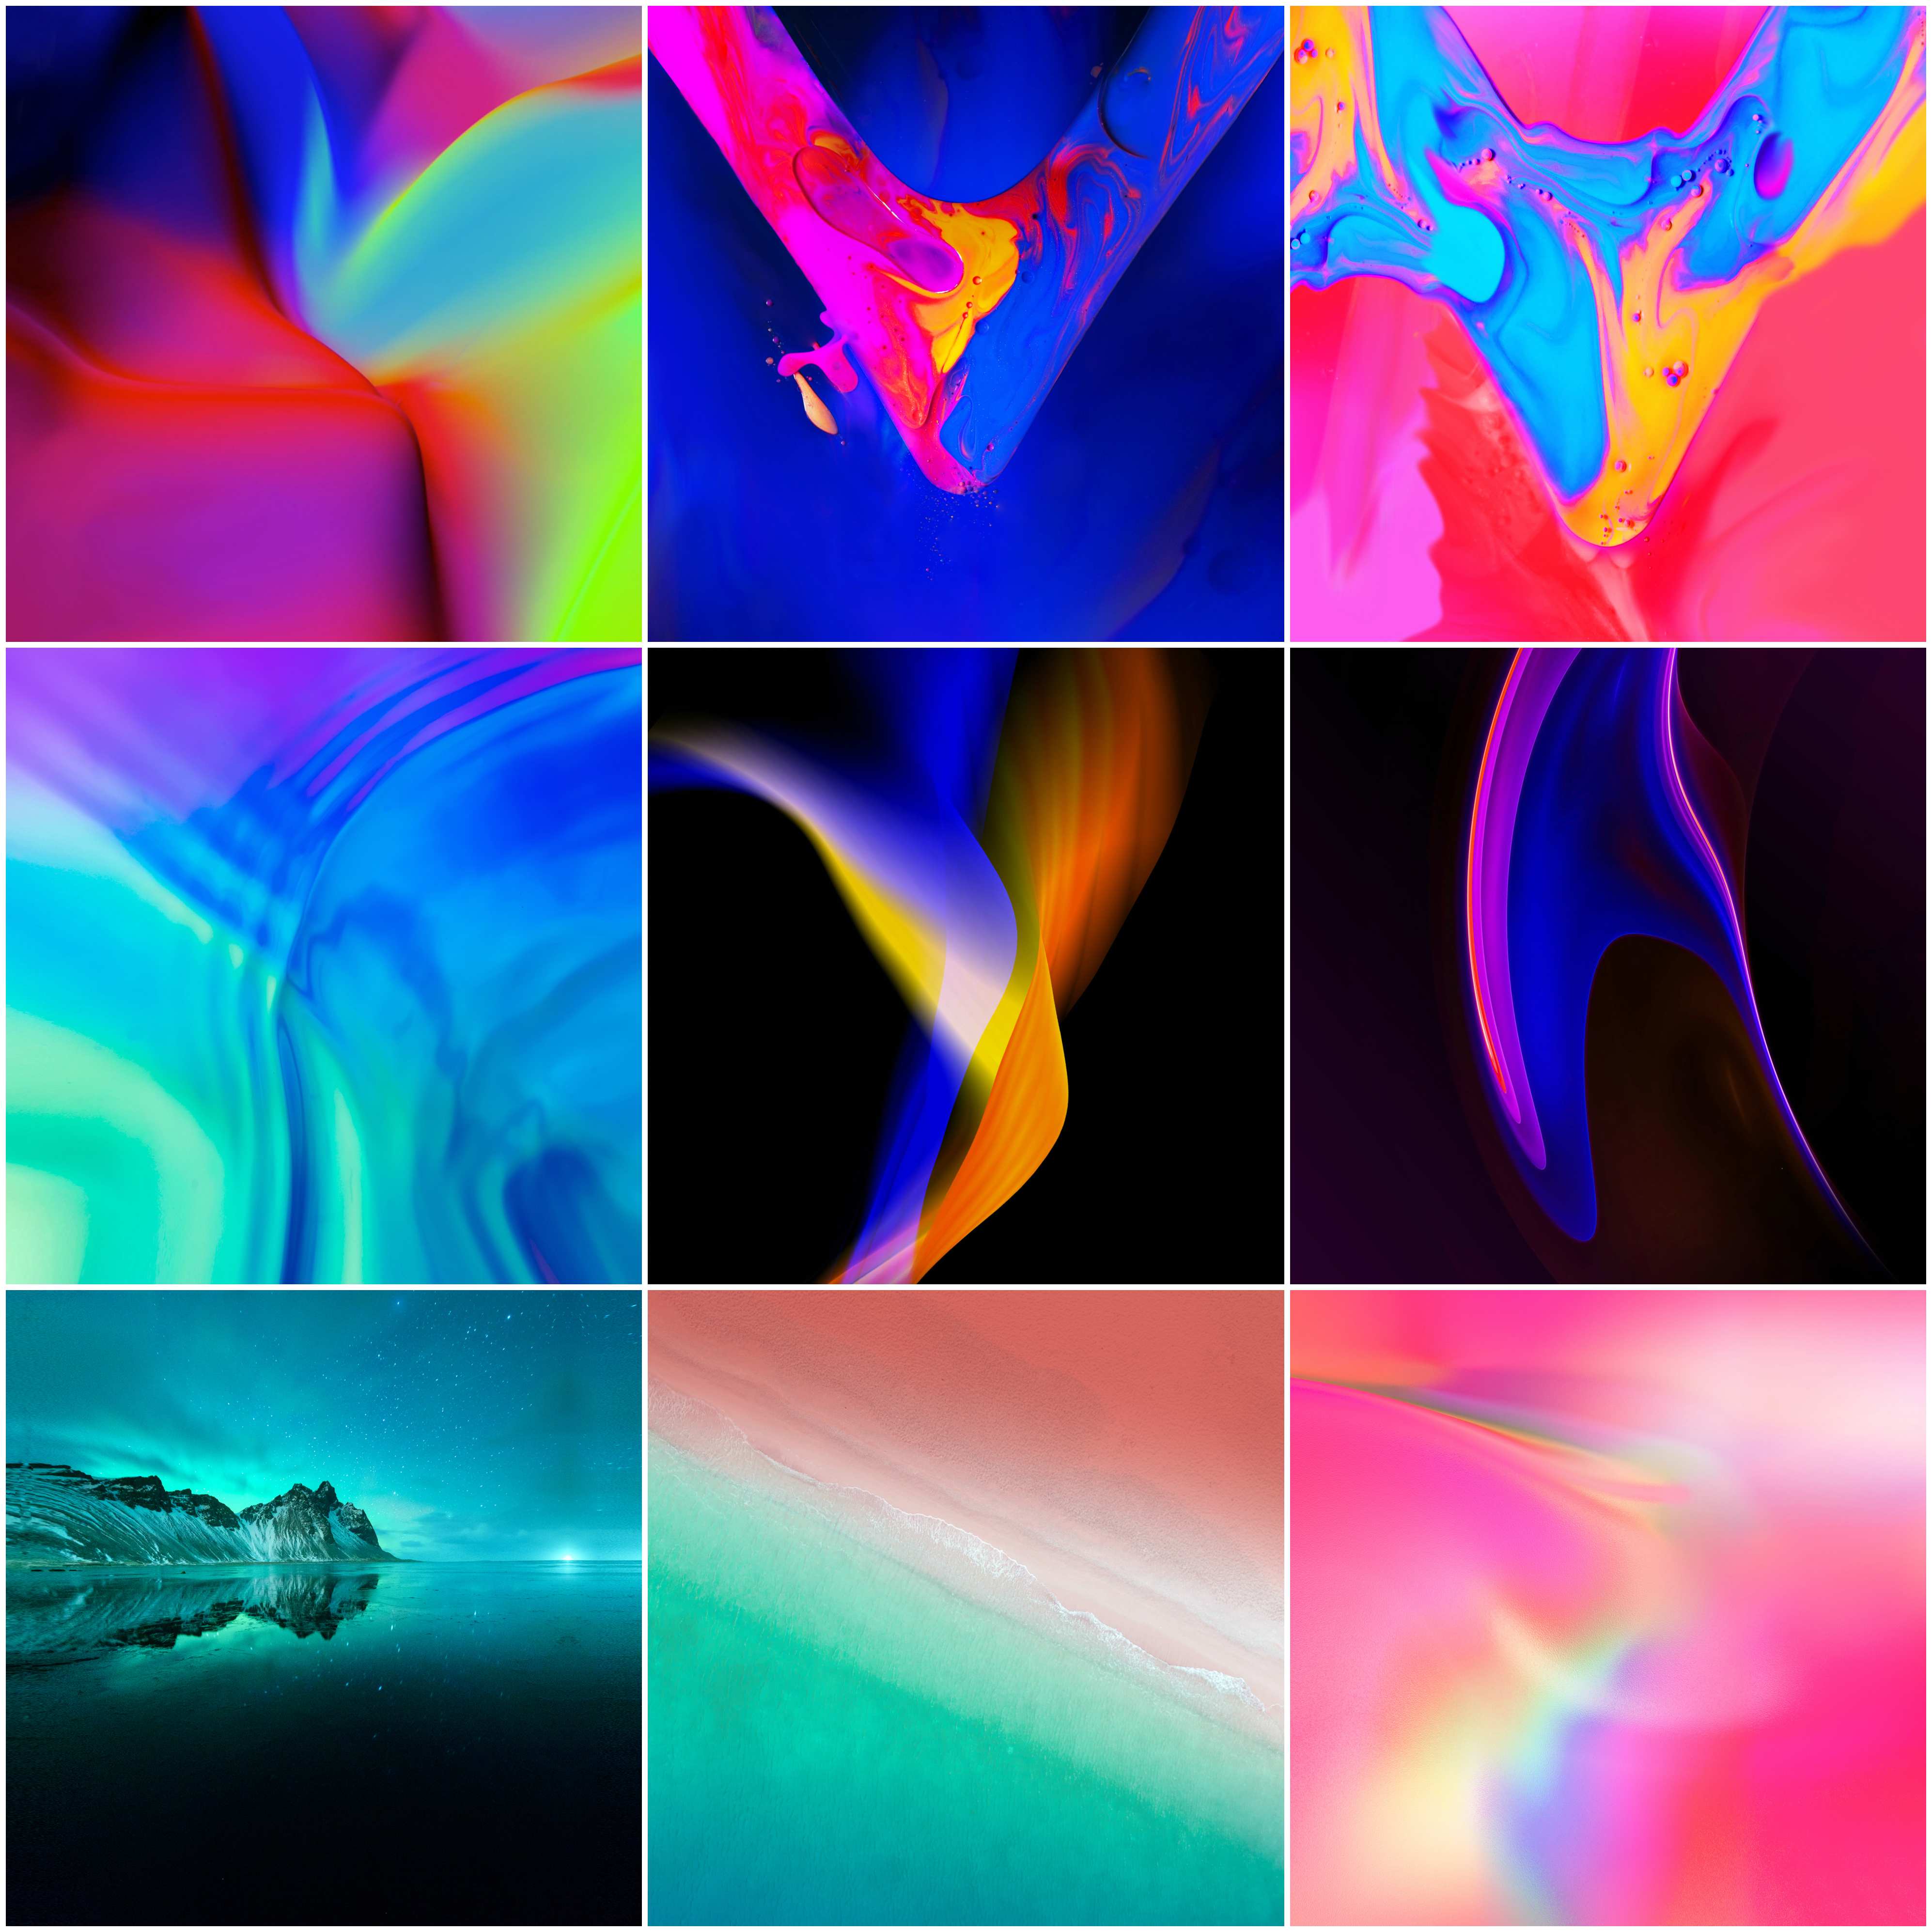 Download Honor V20 Stock Wallpapers - ZIP File Included